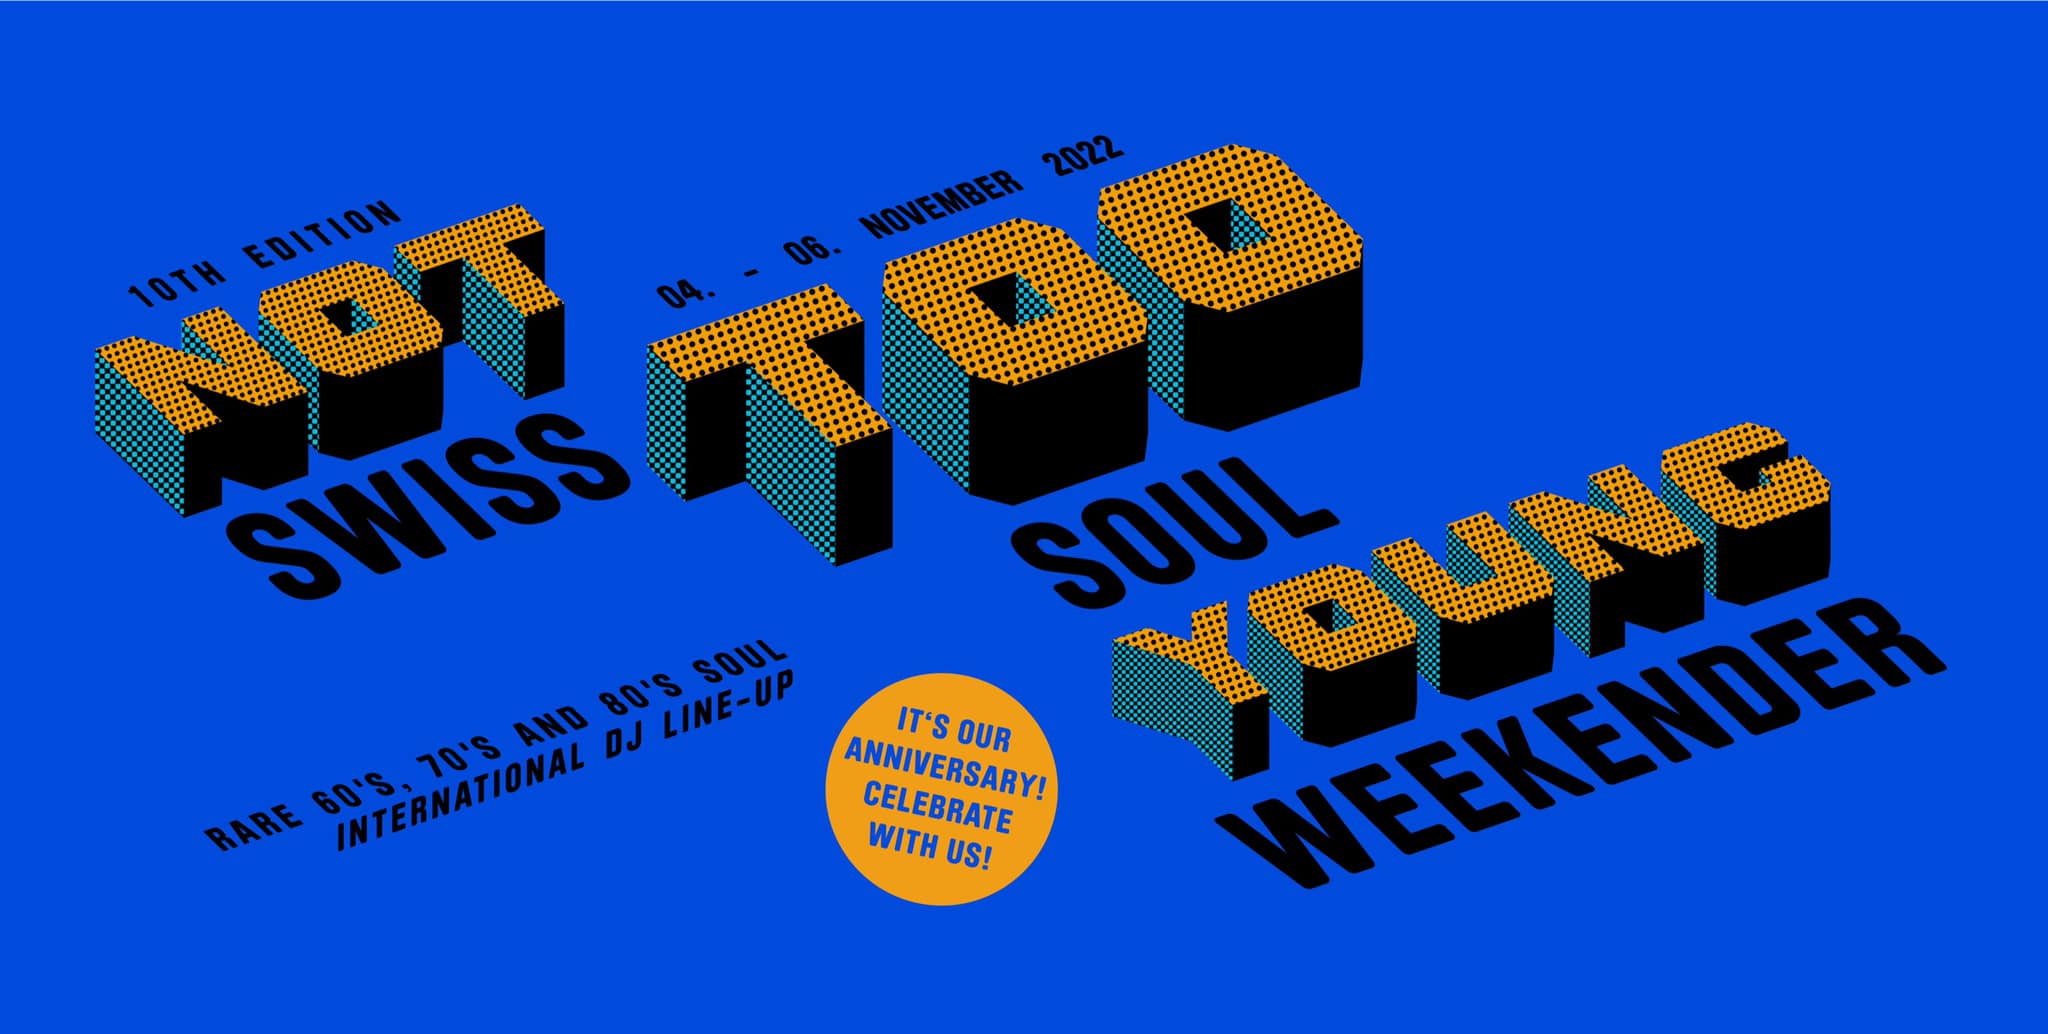 The Not Too Young Swiss Soul Weekender takes place from 04 - 06 November 2022 in different locations in Lucerne.